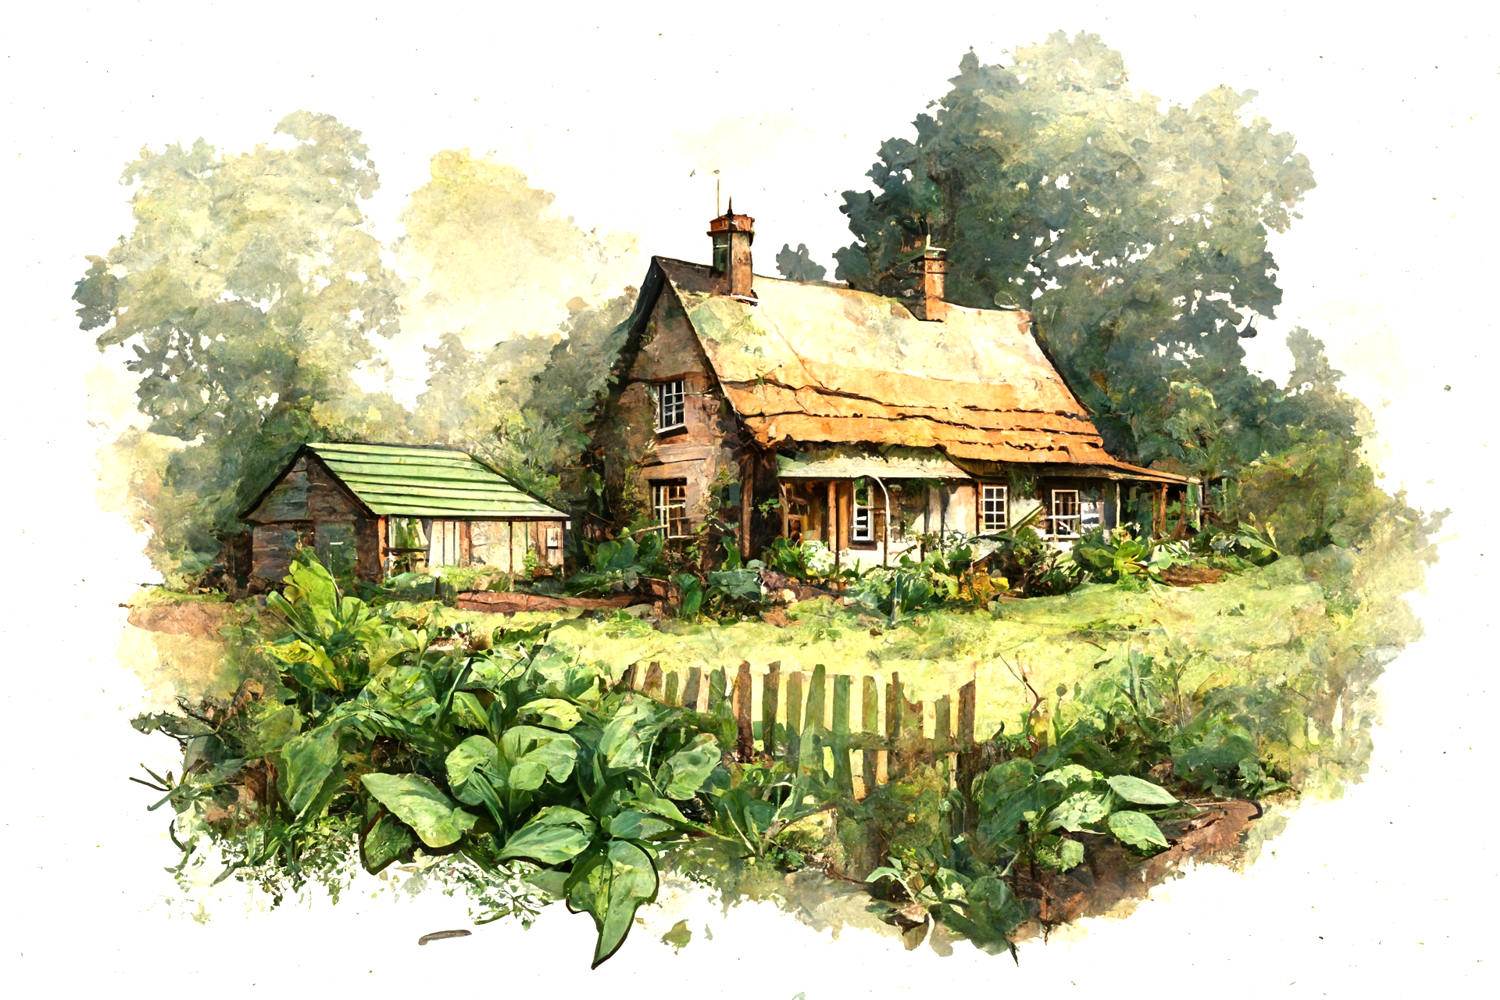 Developing your own Smallholding - A Prepper's Dream